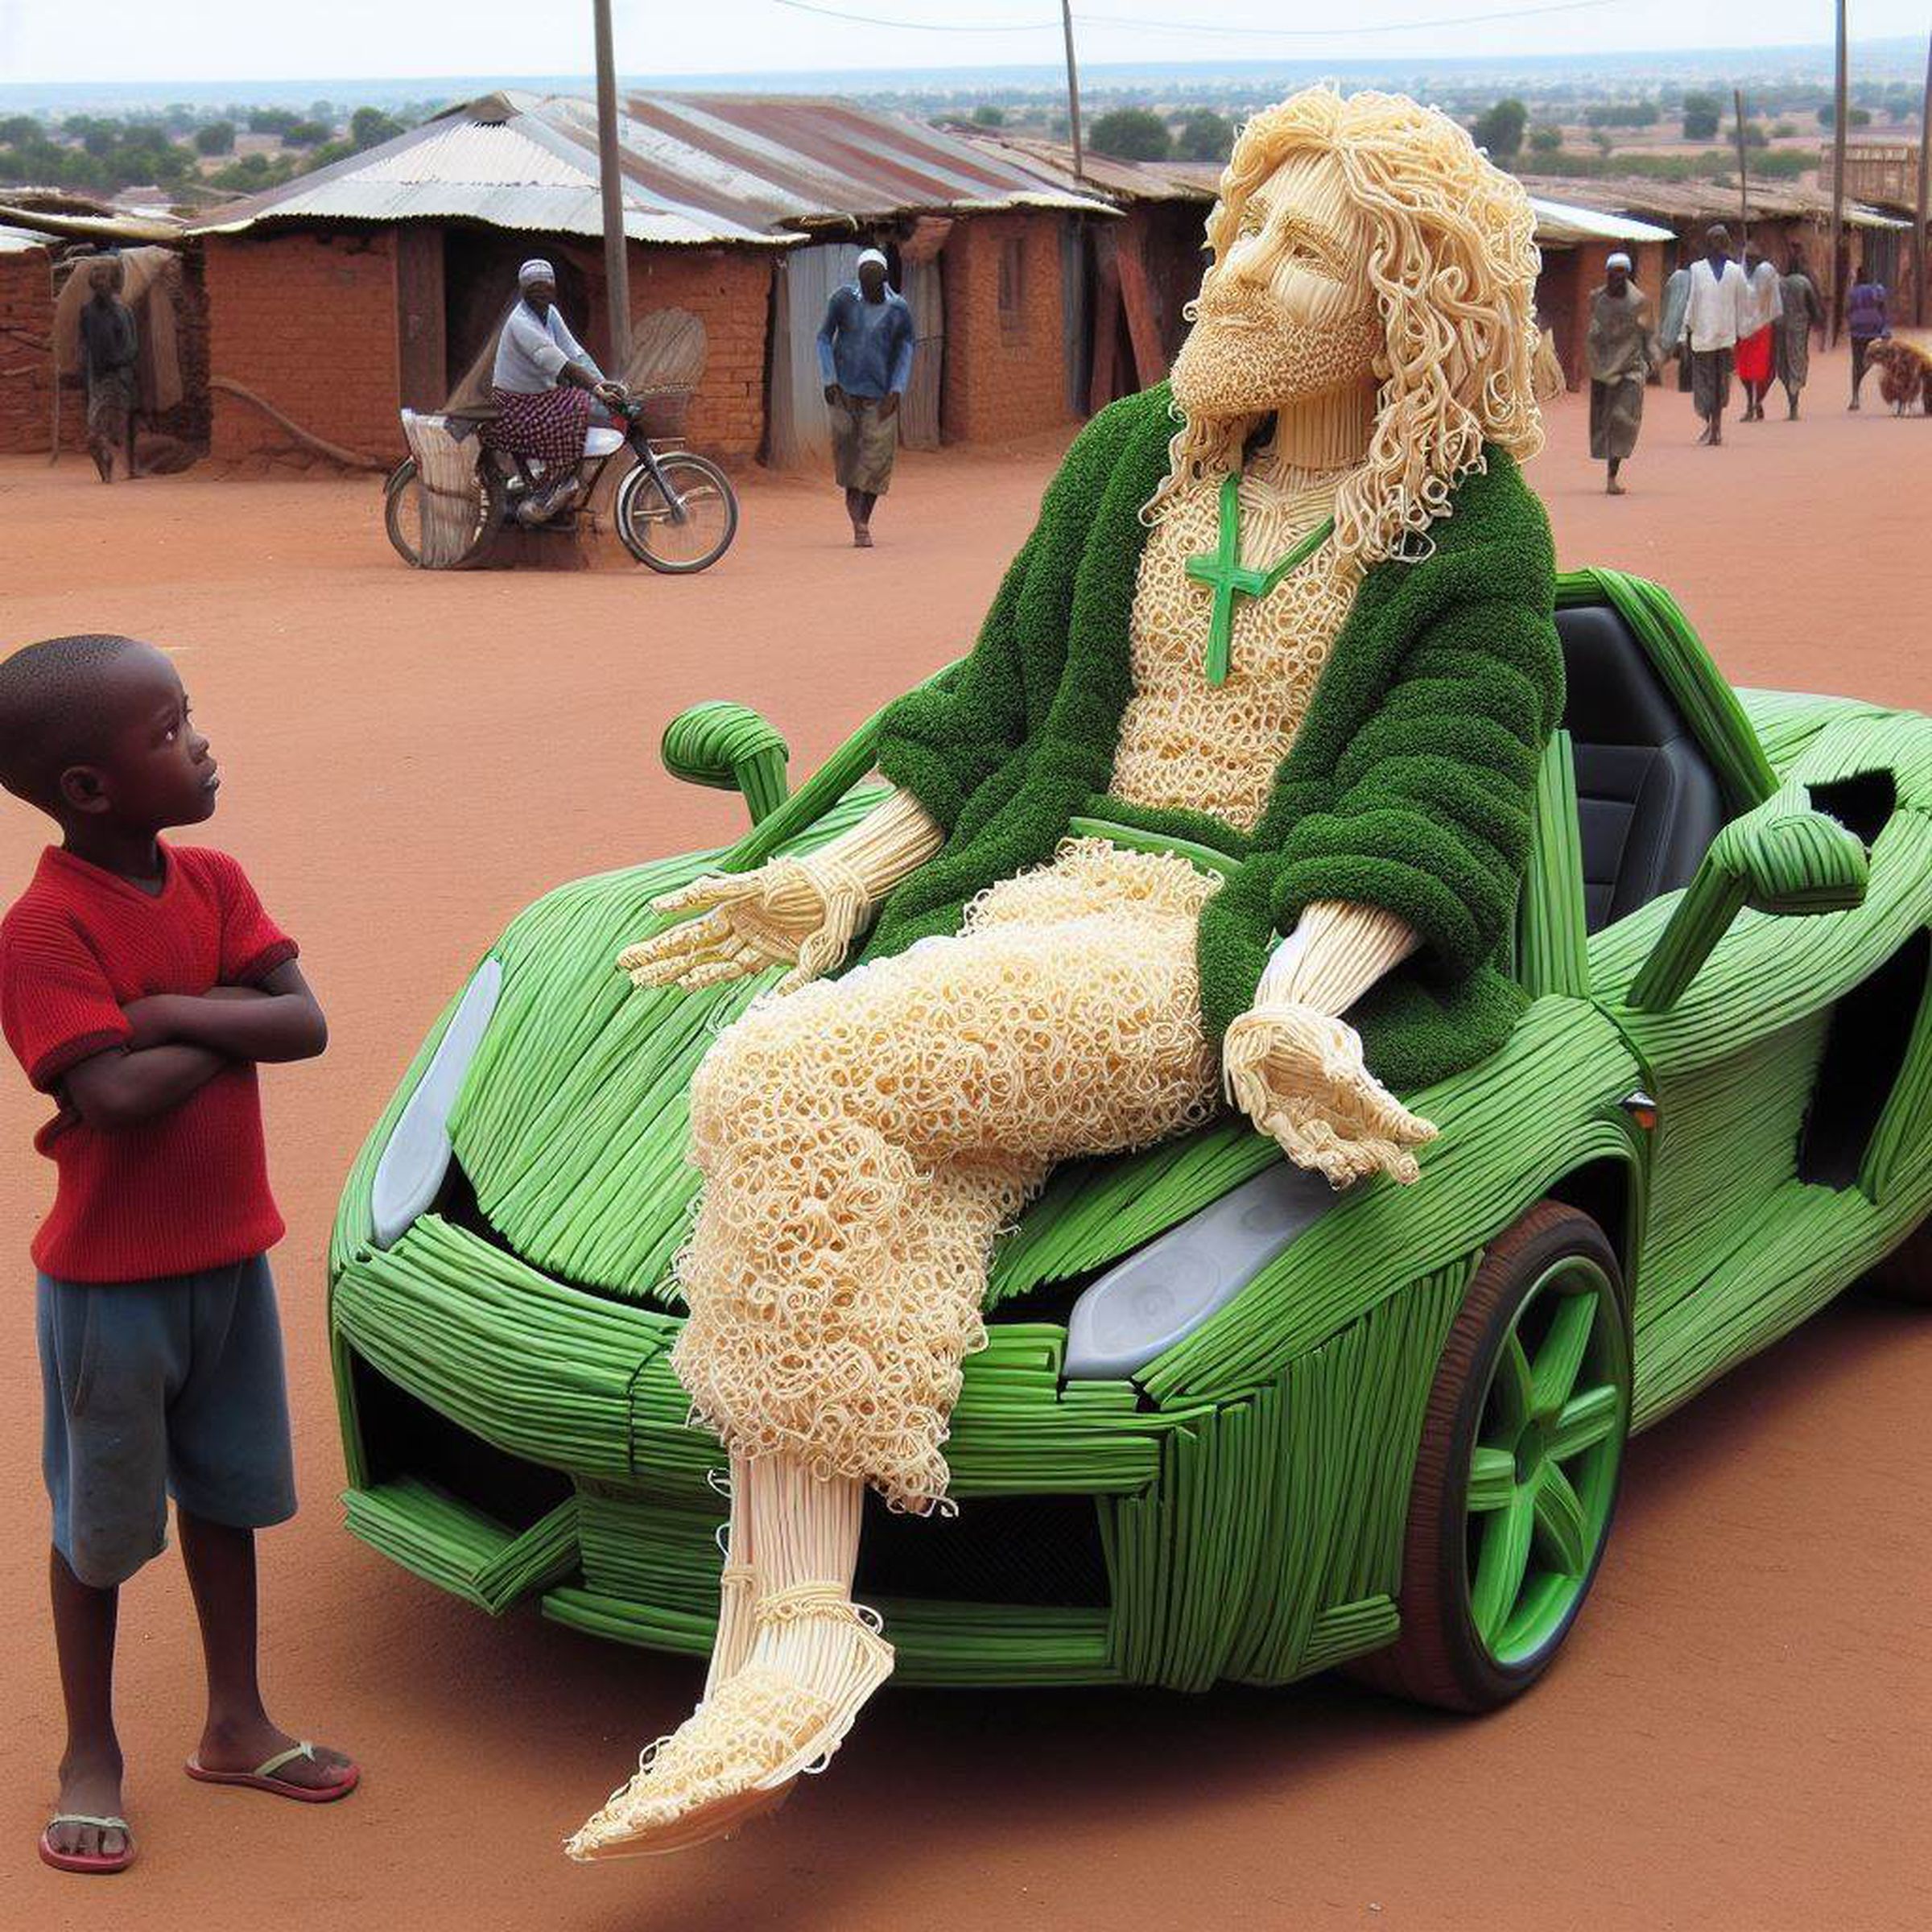 An AI generated image of Jesus made of spaghetti sitting on a Lambo made of green spaghetti. This description is accurate.